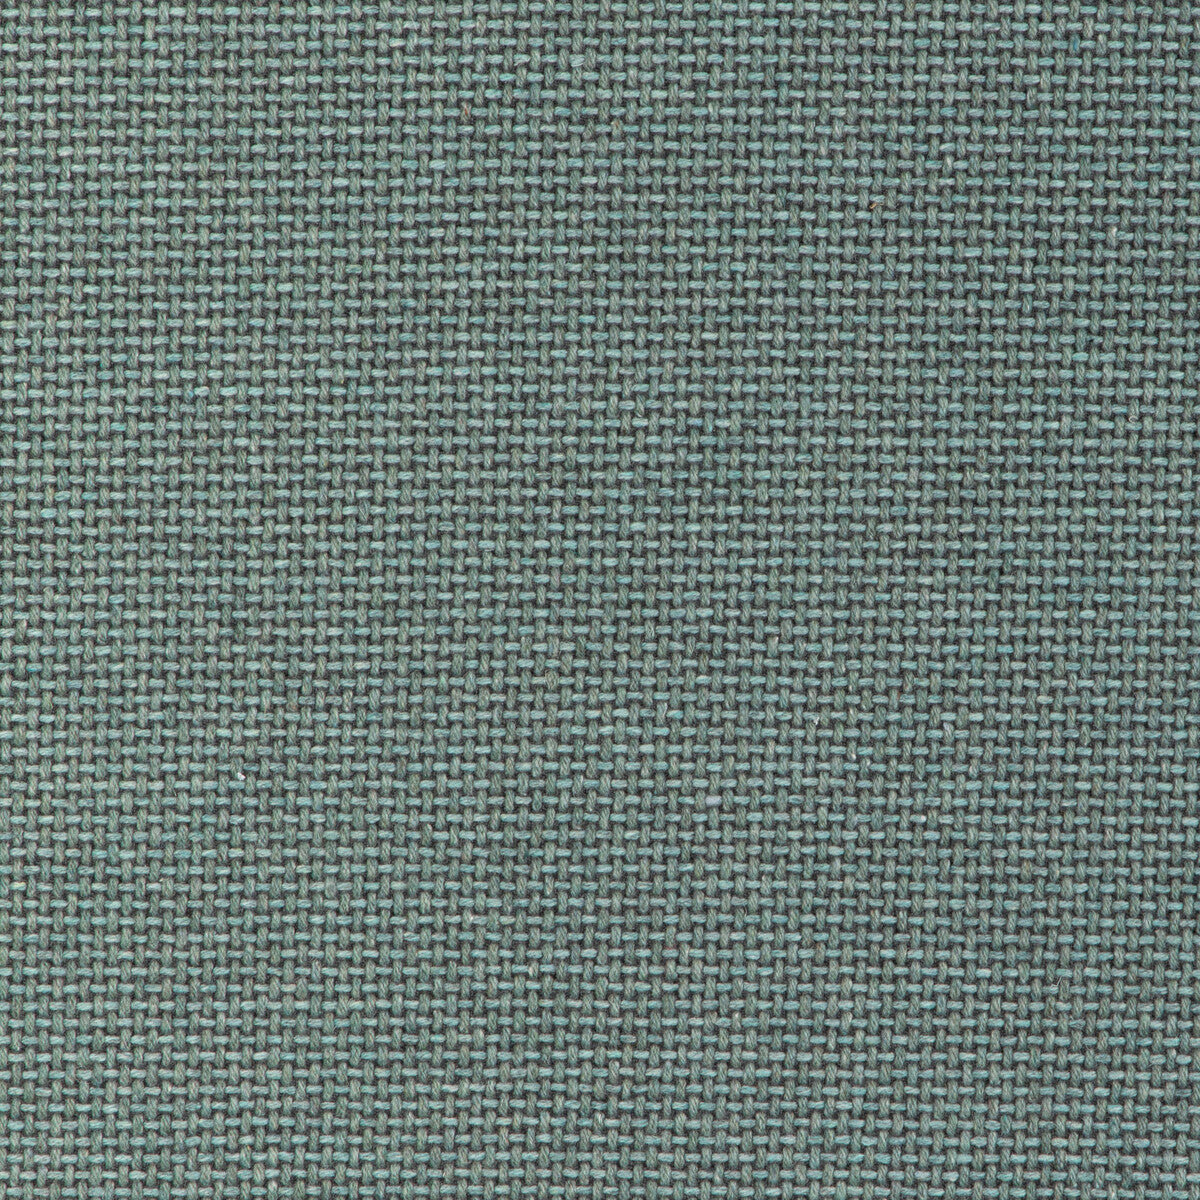 Easton Wool fabric in mineral green color - pattern 37027.355.0 - by Kravet Contract